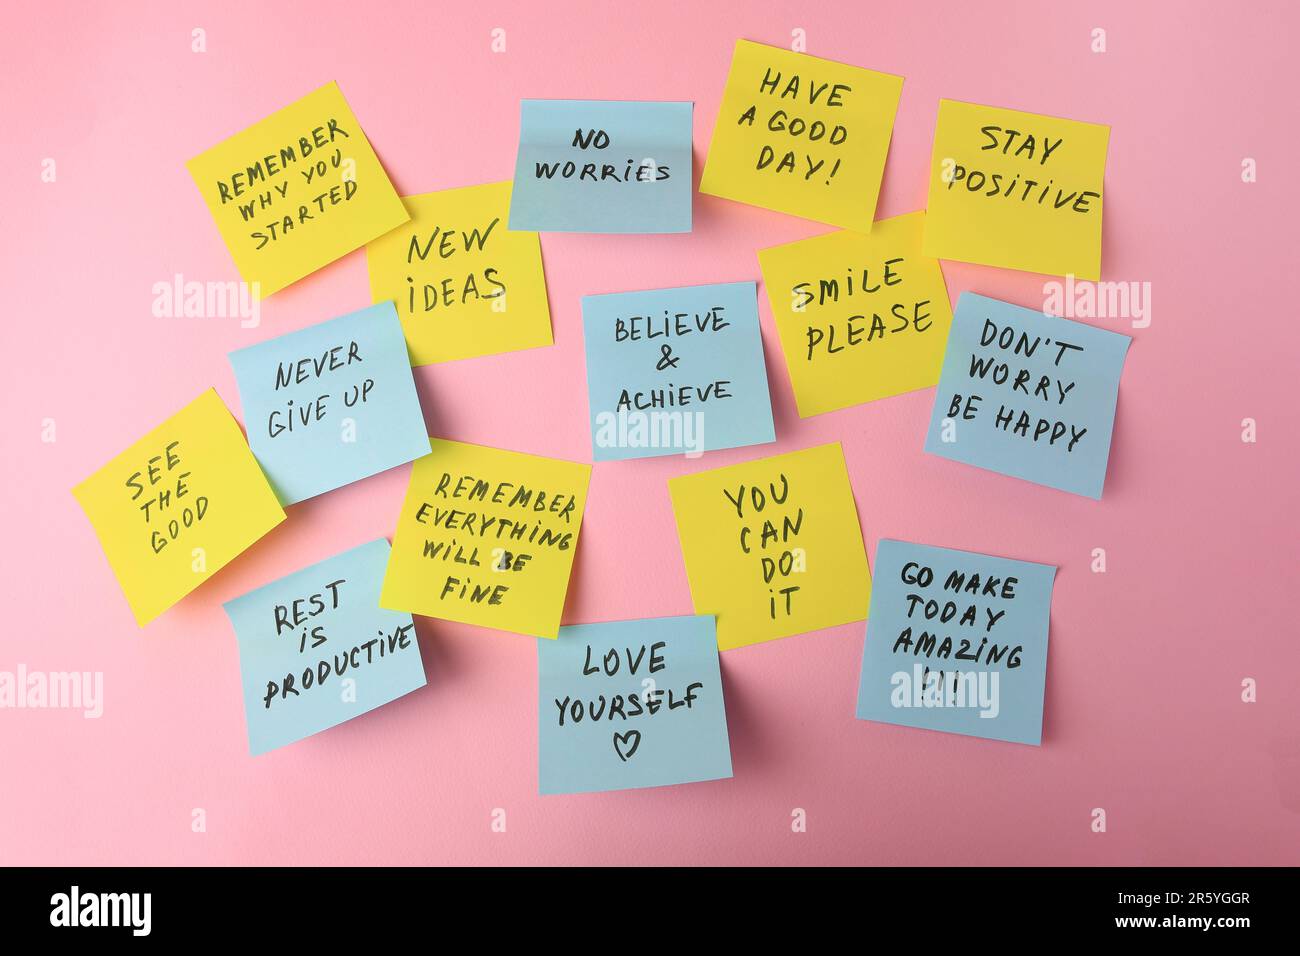 Paper notes with life-affirming phrases on pink background Stock Photo